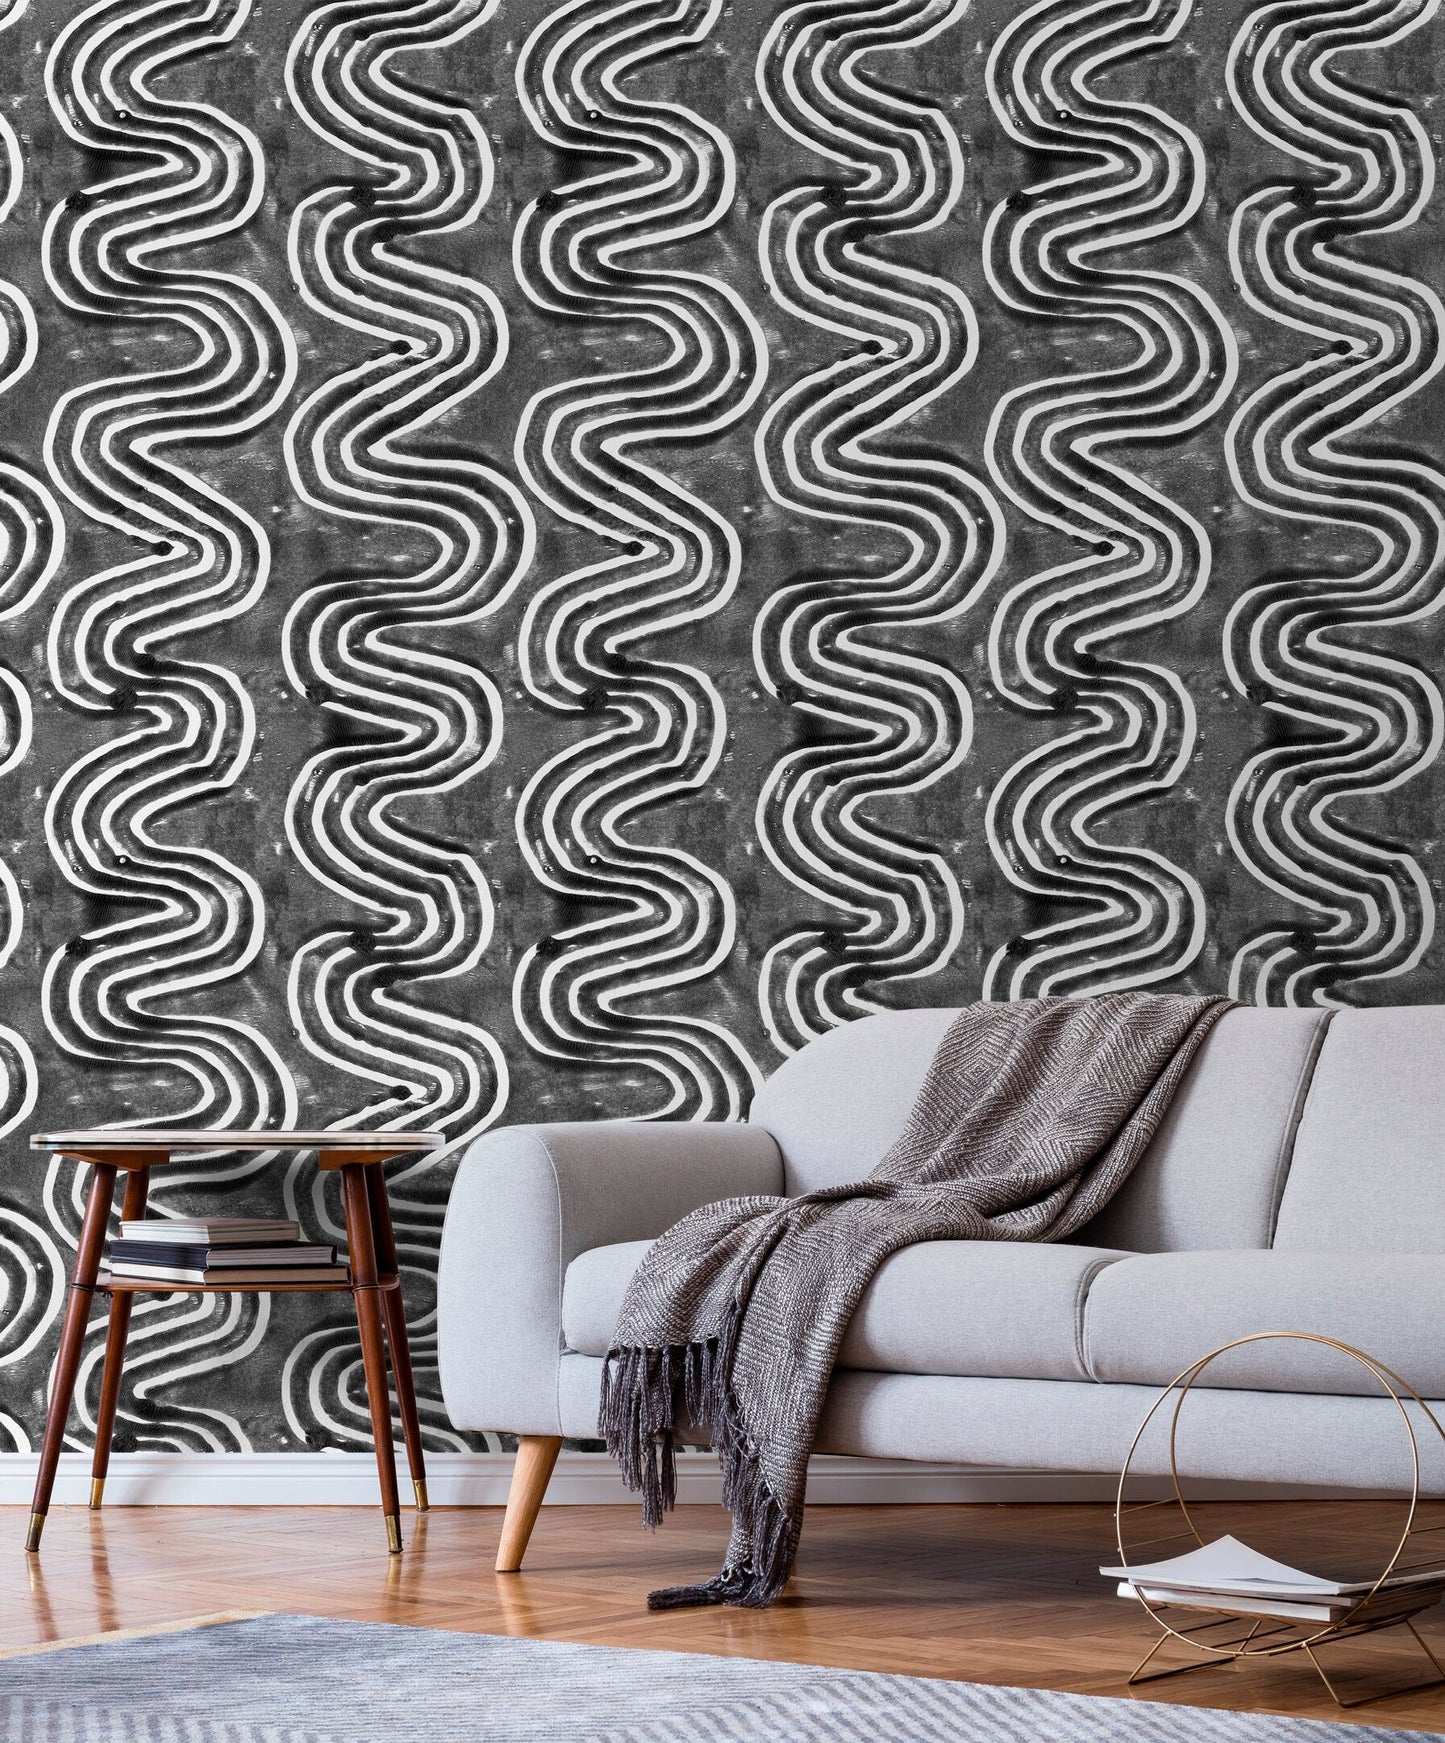 Removable Wallpaper Peel and Stick Wallpaper Wall Paper Wall Mosaico Tiles Wallpaper Wallpaper Print - X096